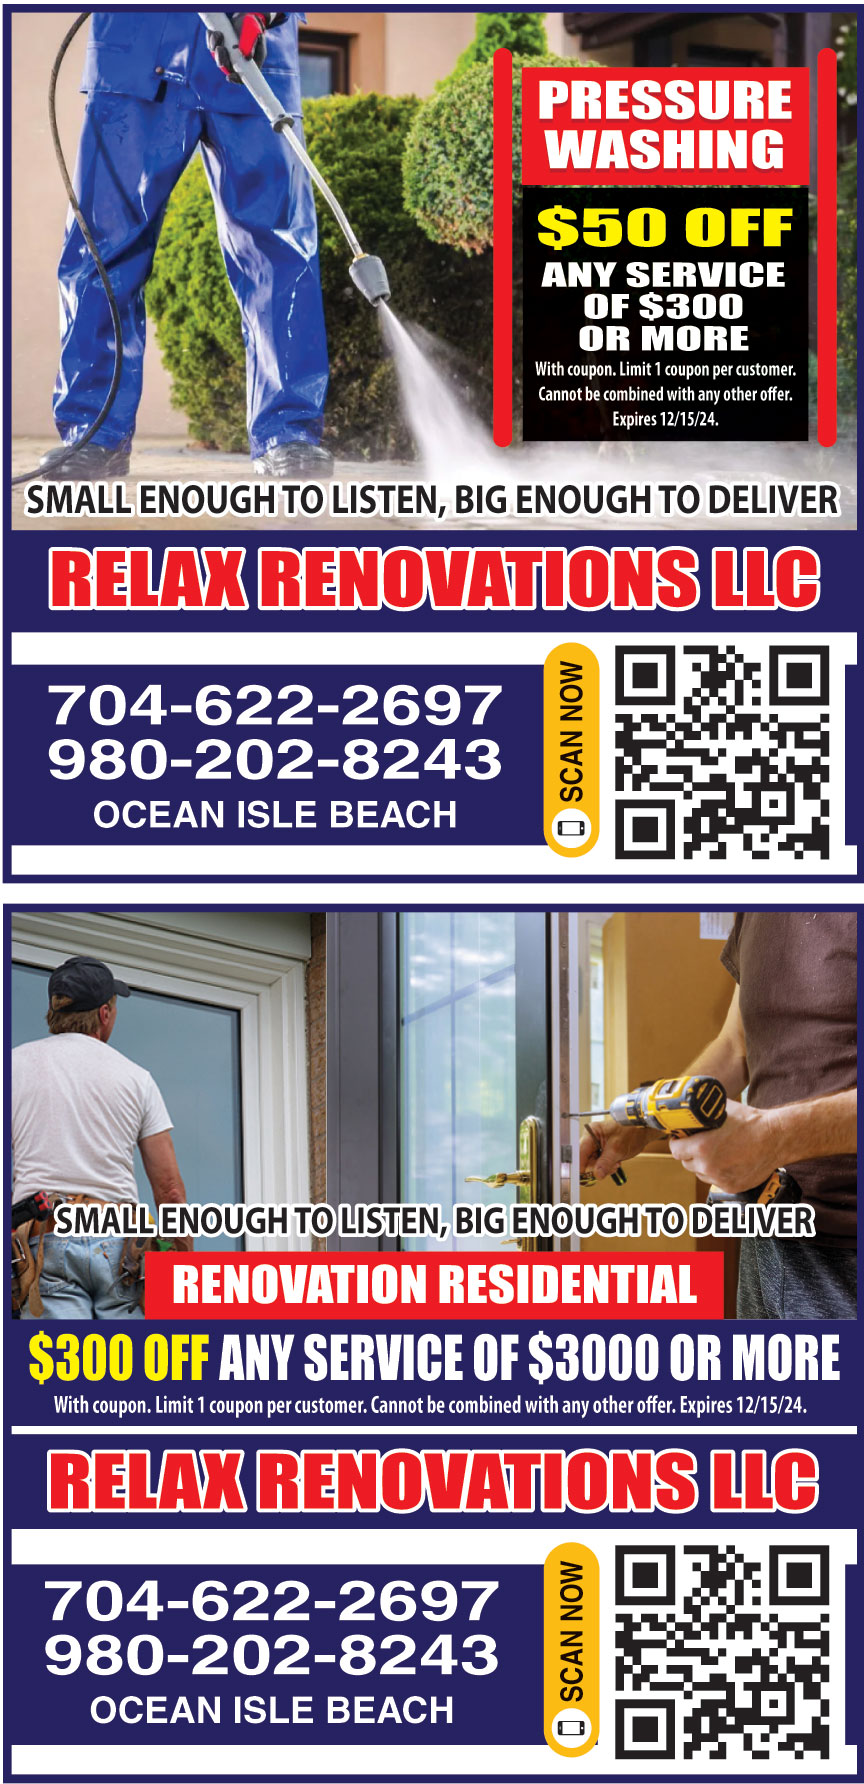 RELAX RENOVATIONS